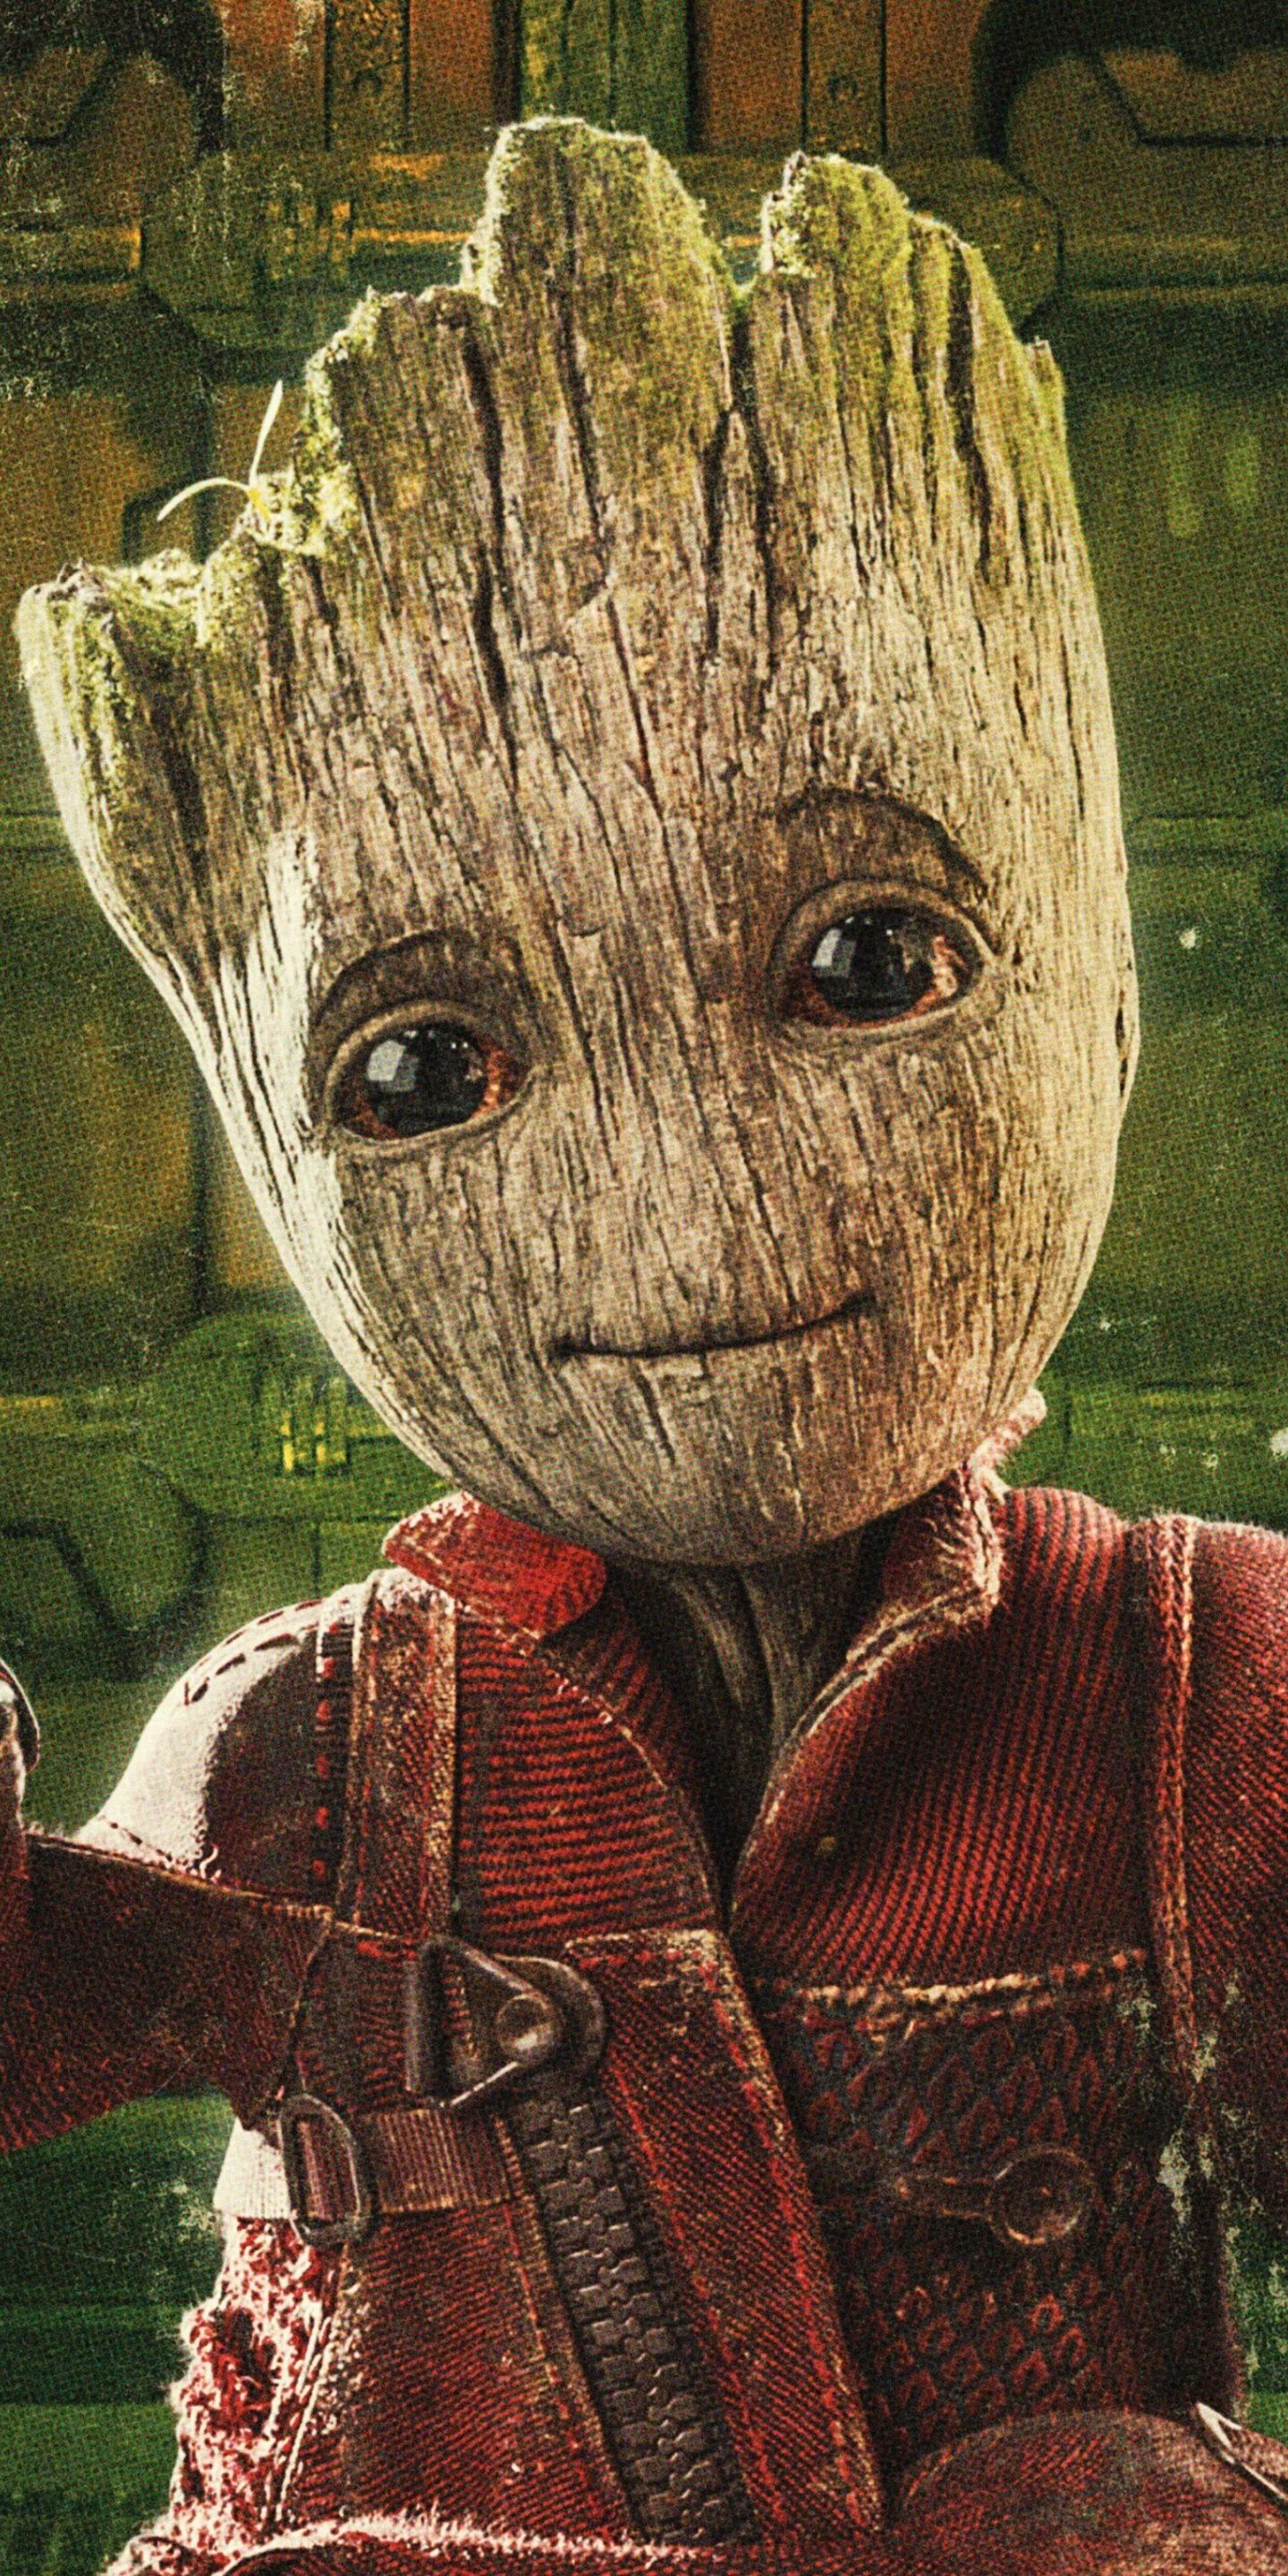 Download 1440x2880 wallpaper baby groot, guardians of the galaxy